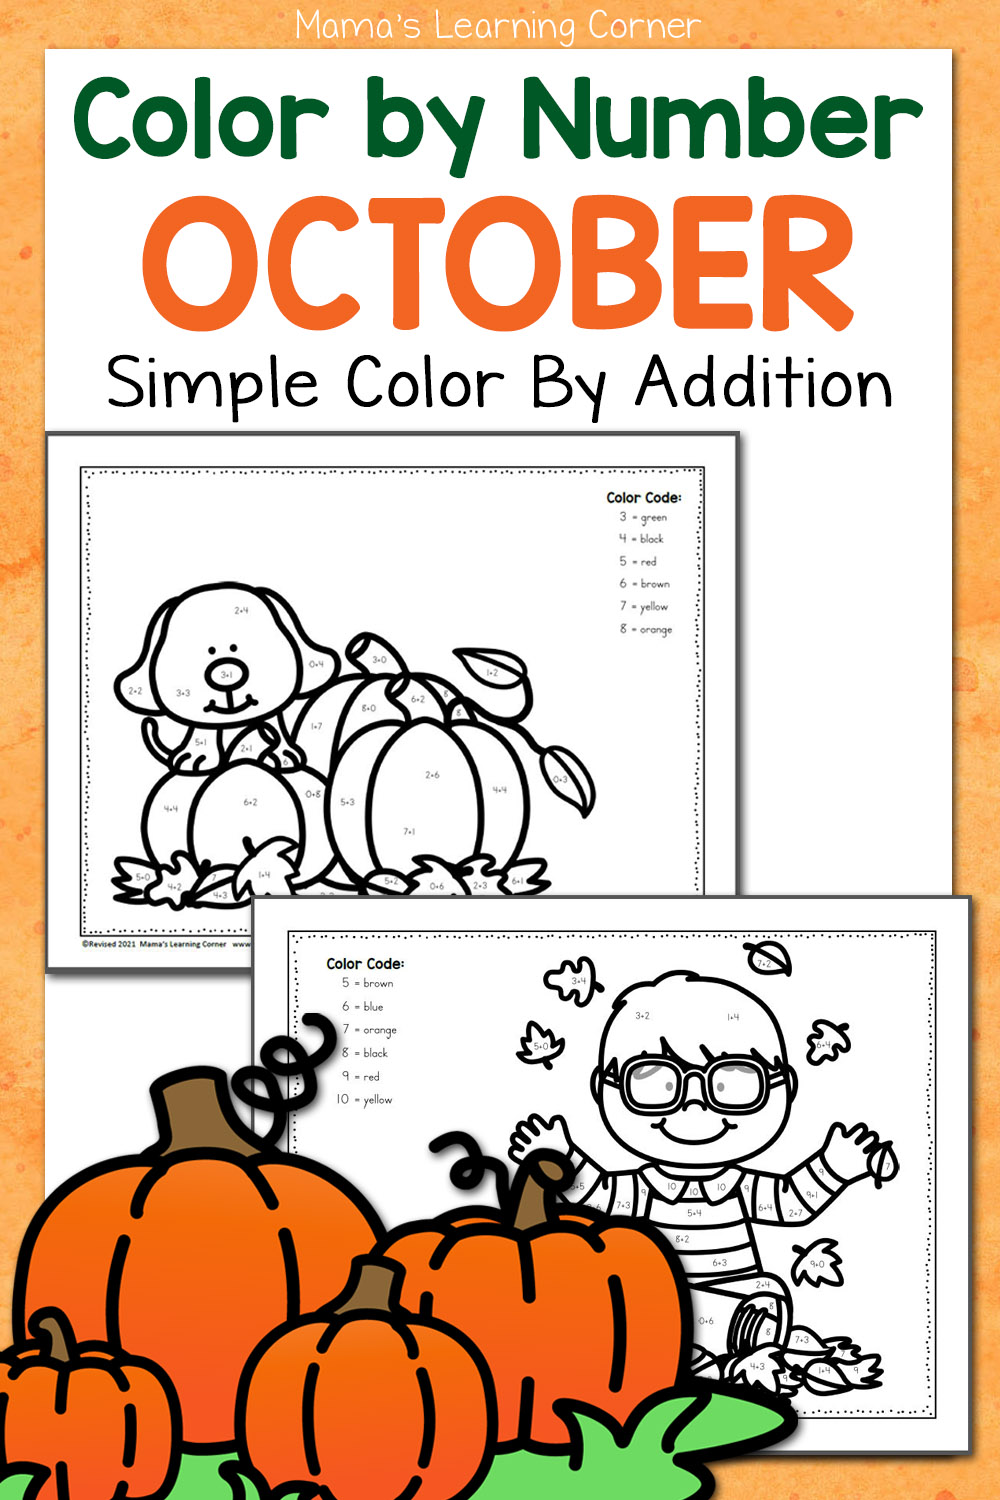 october-color-by-number-worksheets-mamas-learning-corner